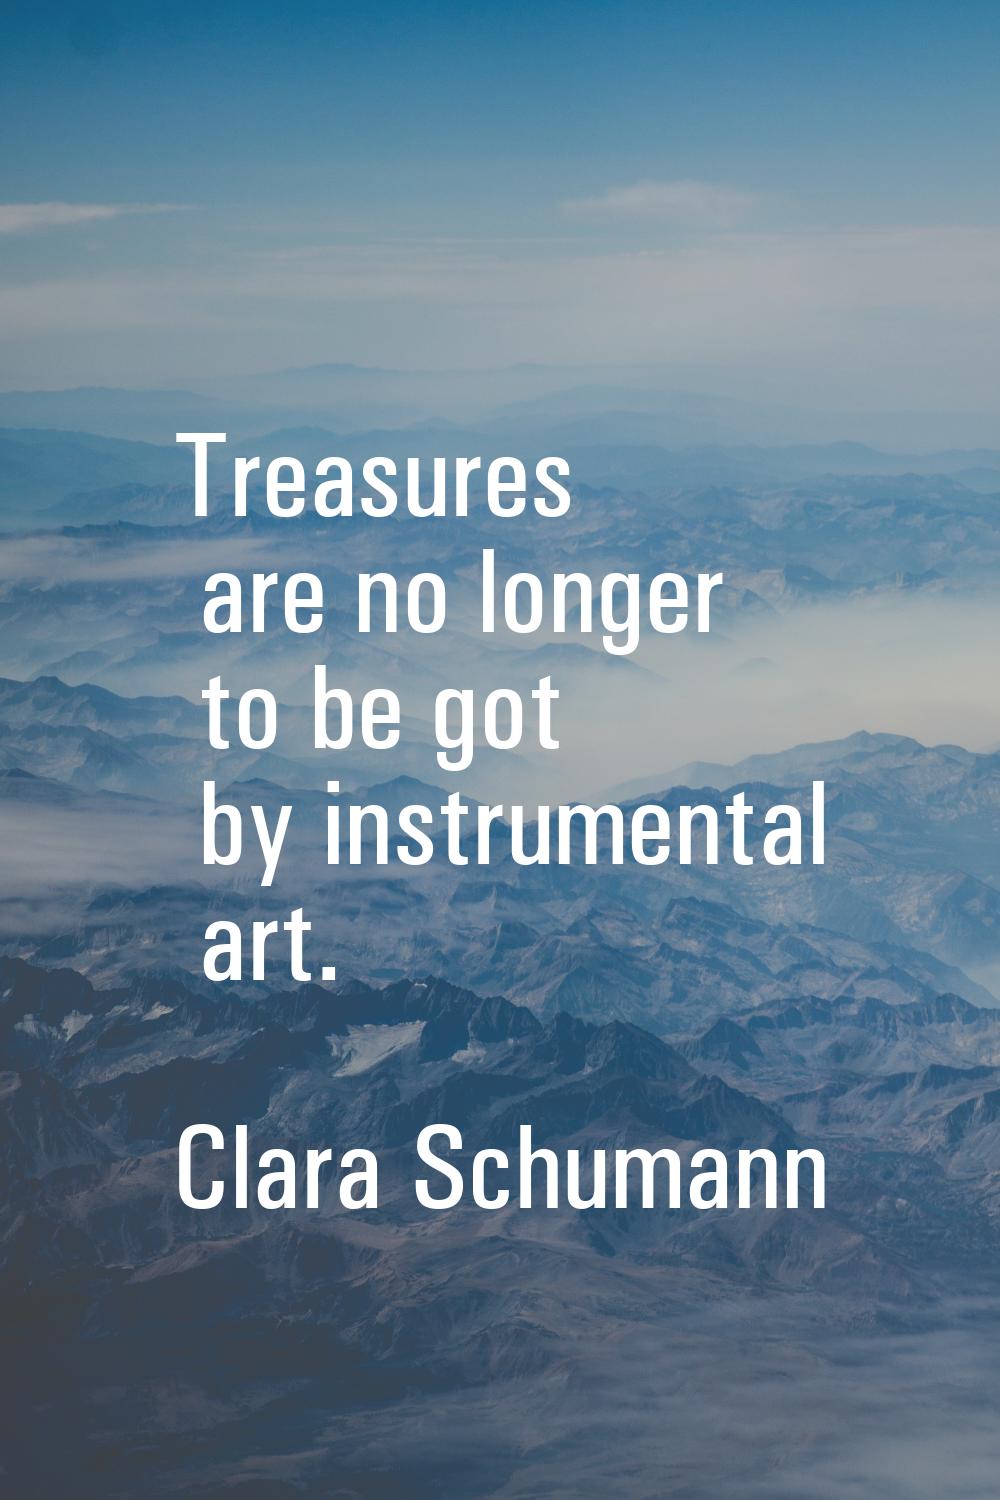 Treasures are no longer to be got by instrumental art.